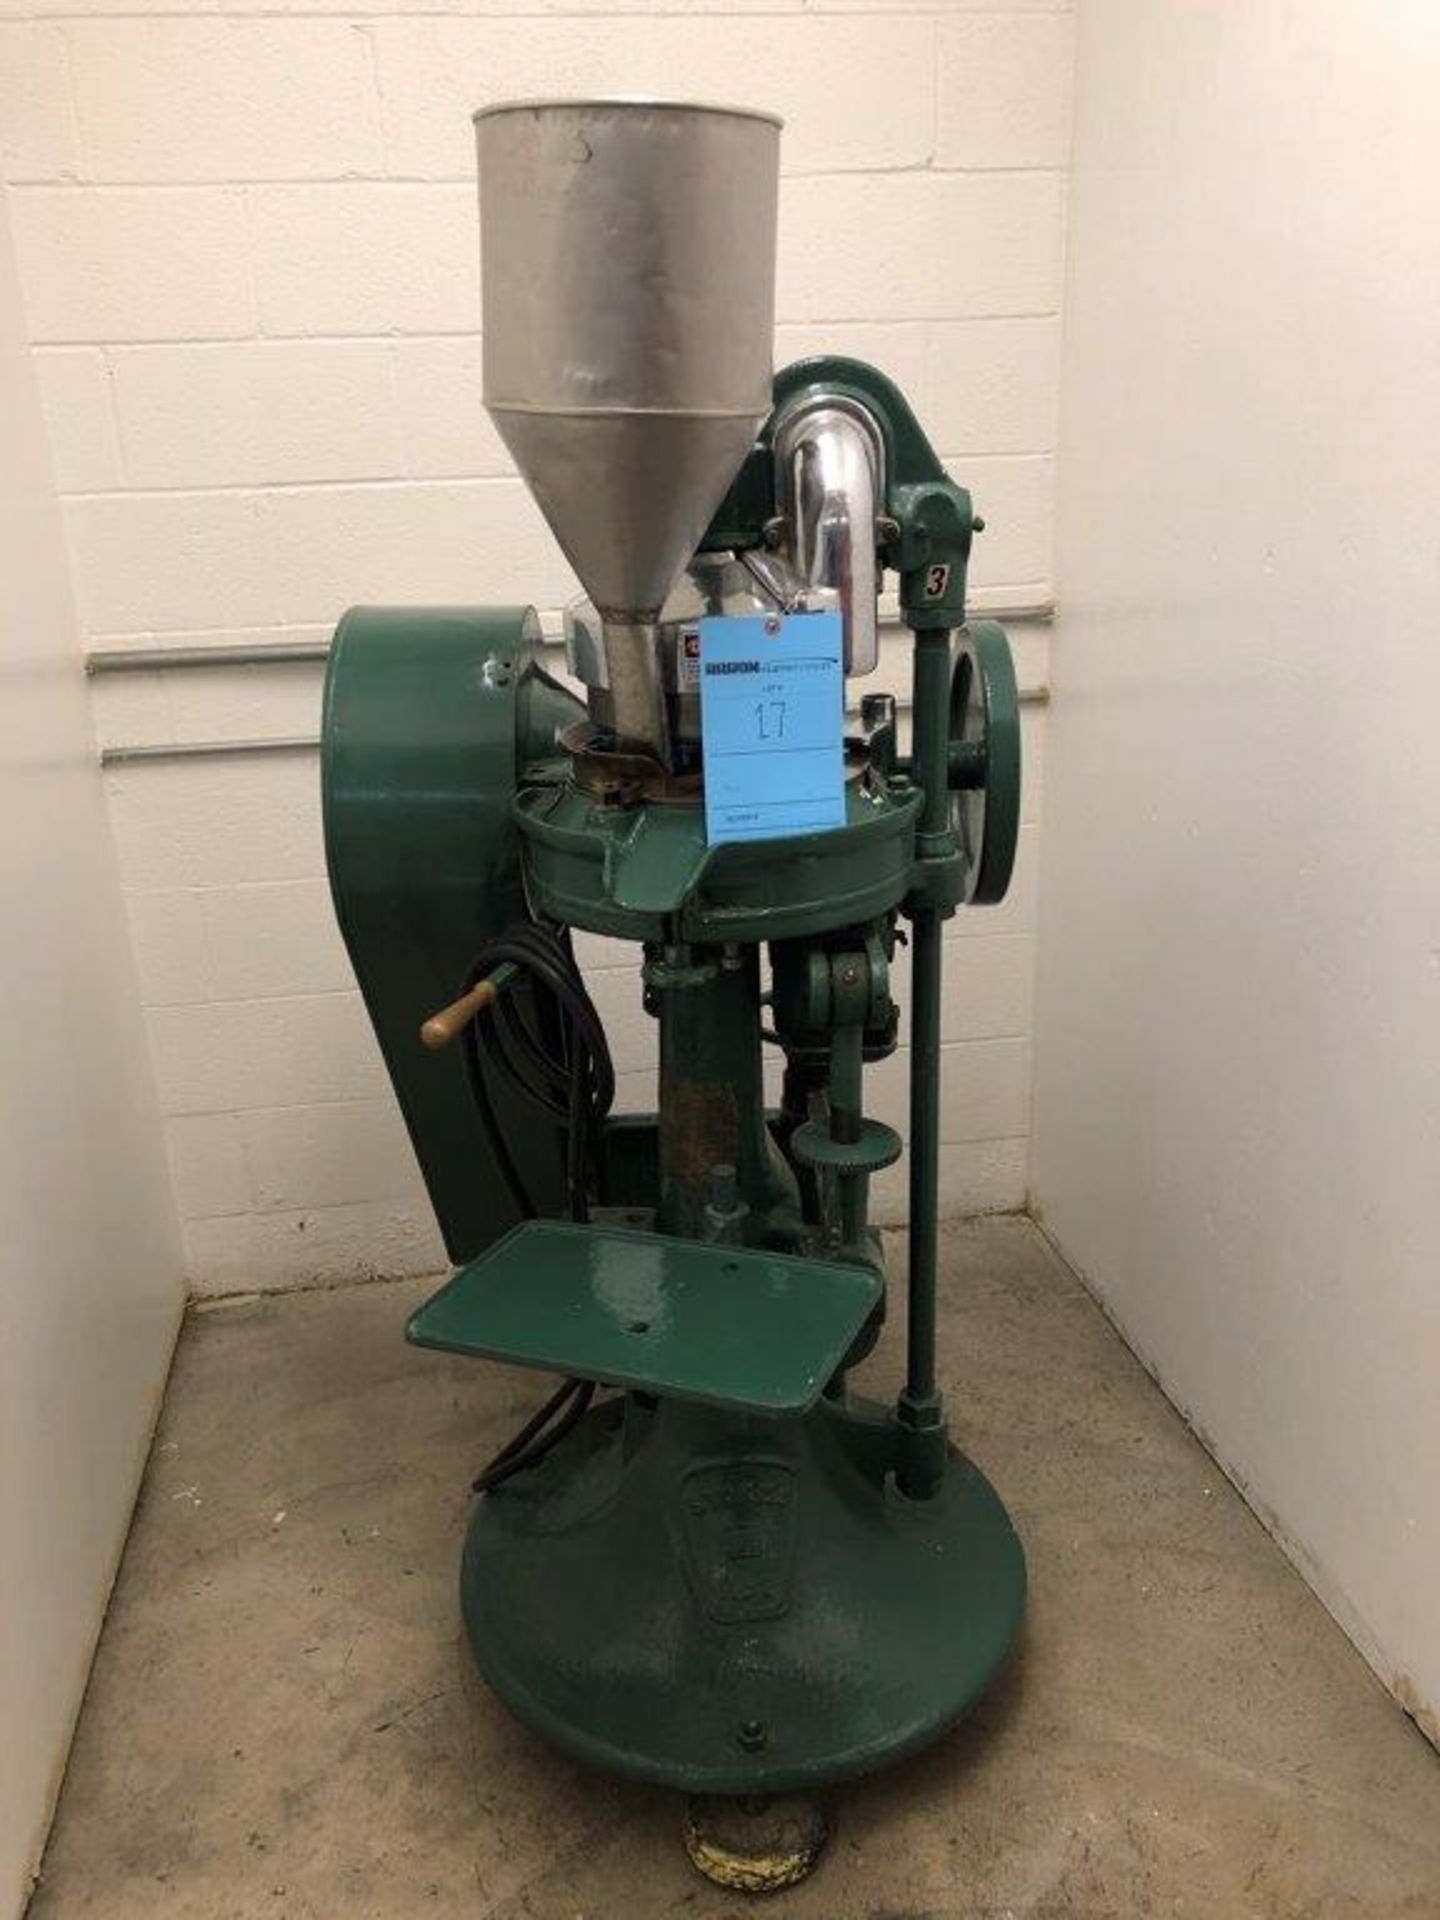 Stokes Tablet Press, RB2